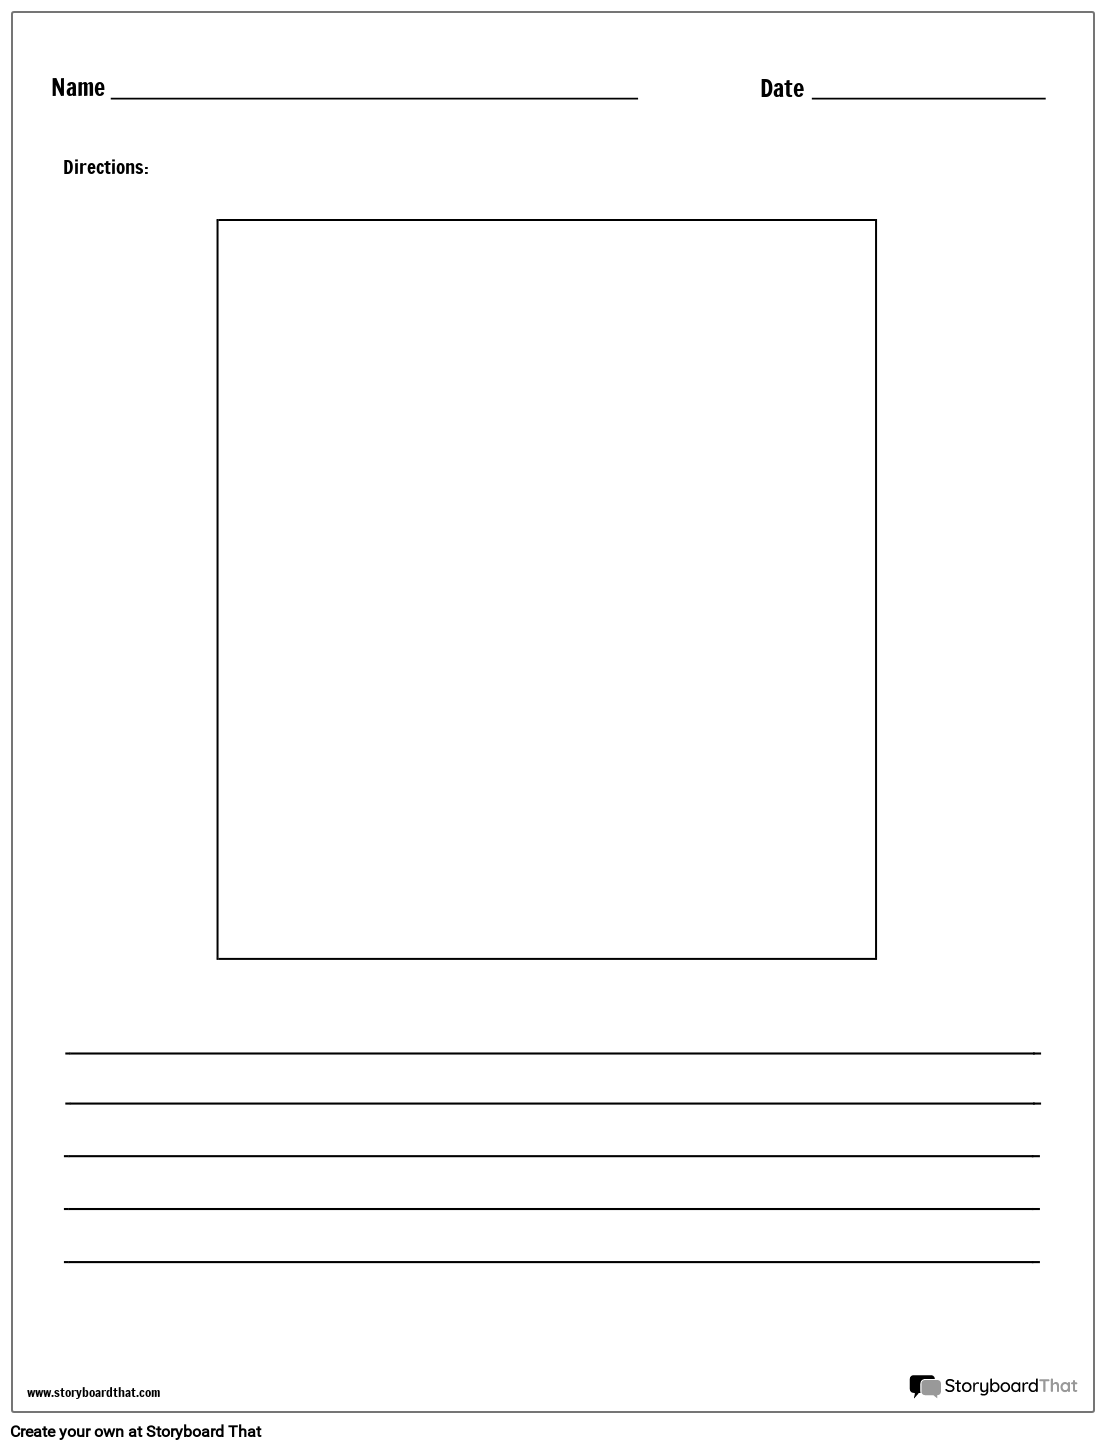 Easy-to-Use Story Worksheet for Students